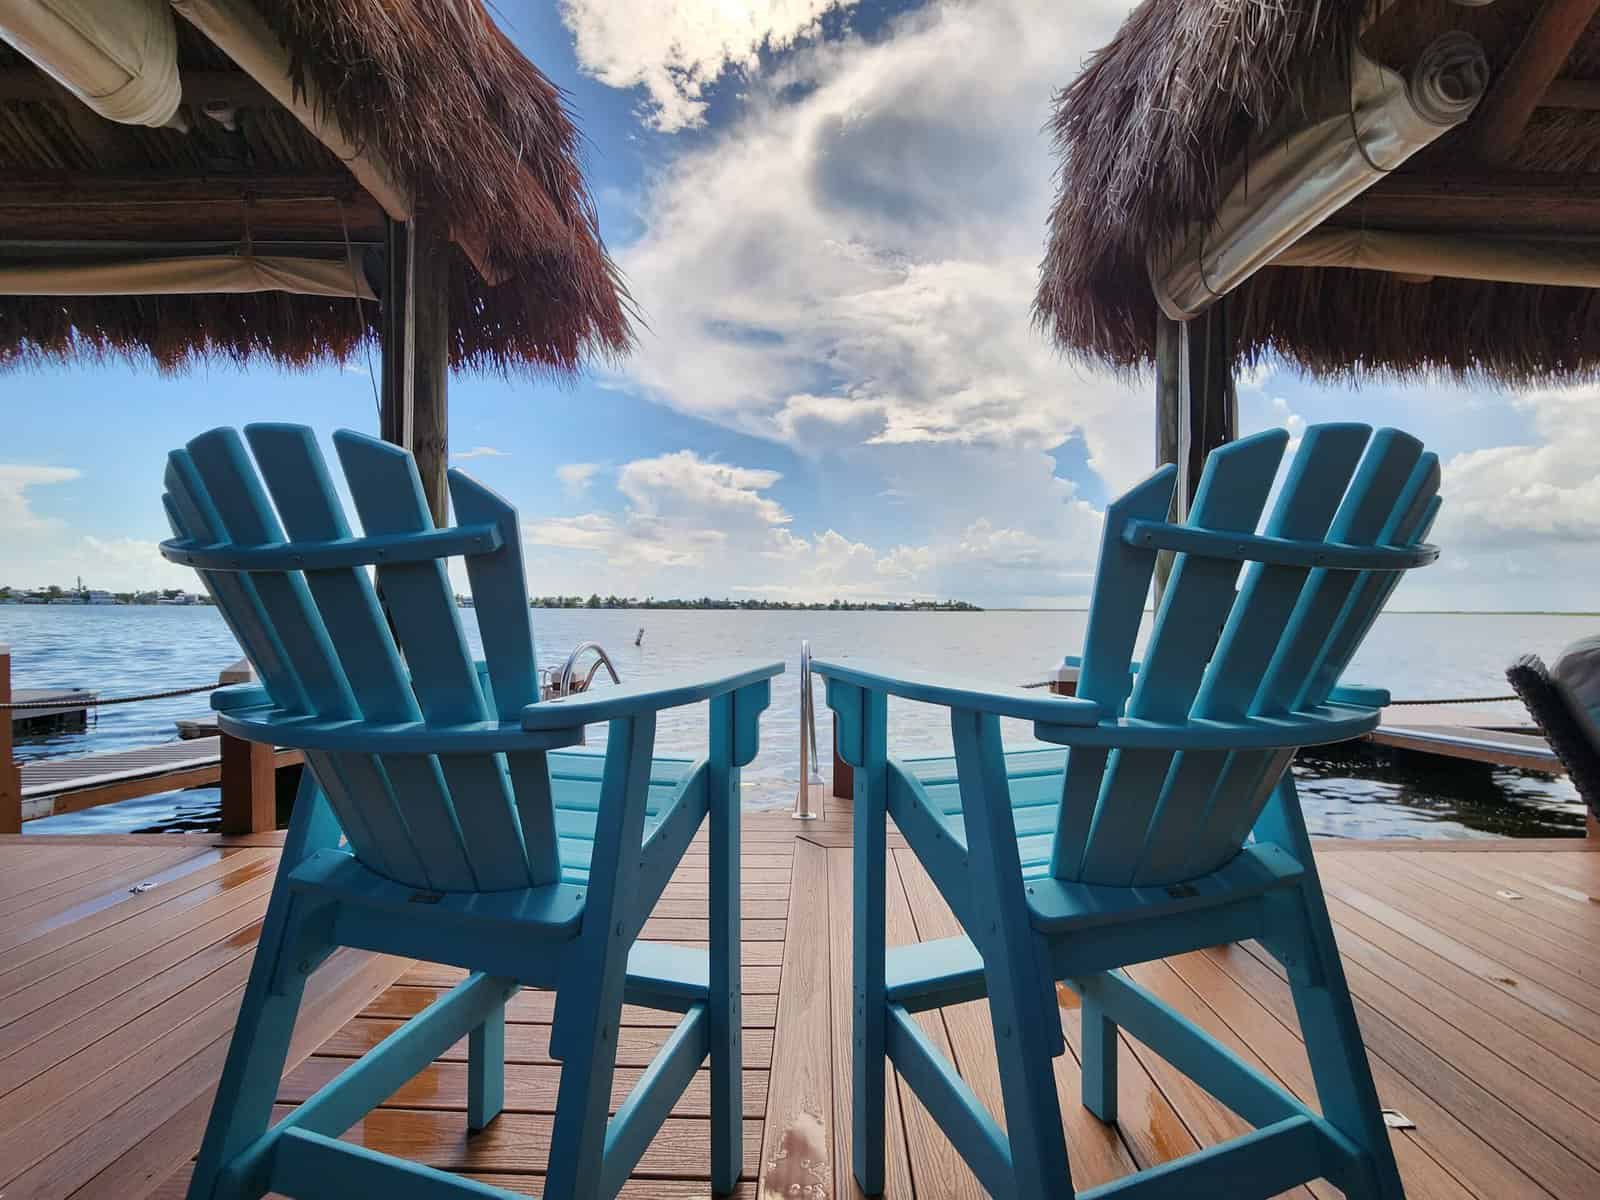 Captains Chairs on the bay